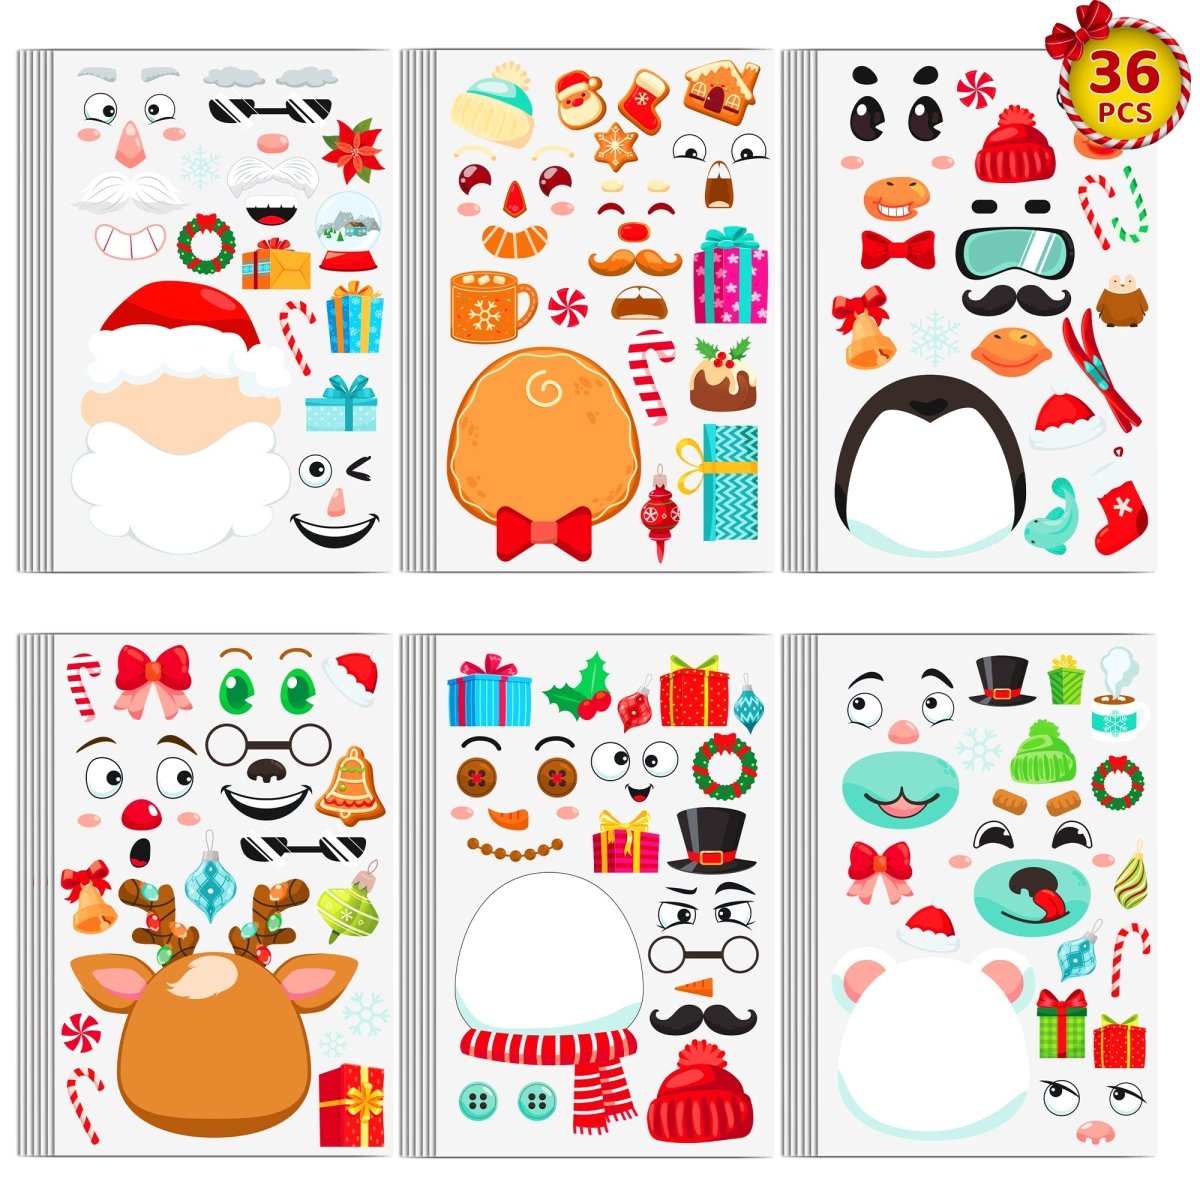 240 Pcs It’s Beginning to Smell A Lot Like Stickers,Cute Small Business Envelopes Stickers for Business Packages/Handmade Goods/Bags,Christmas Theme